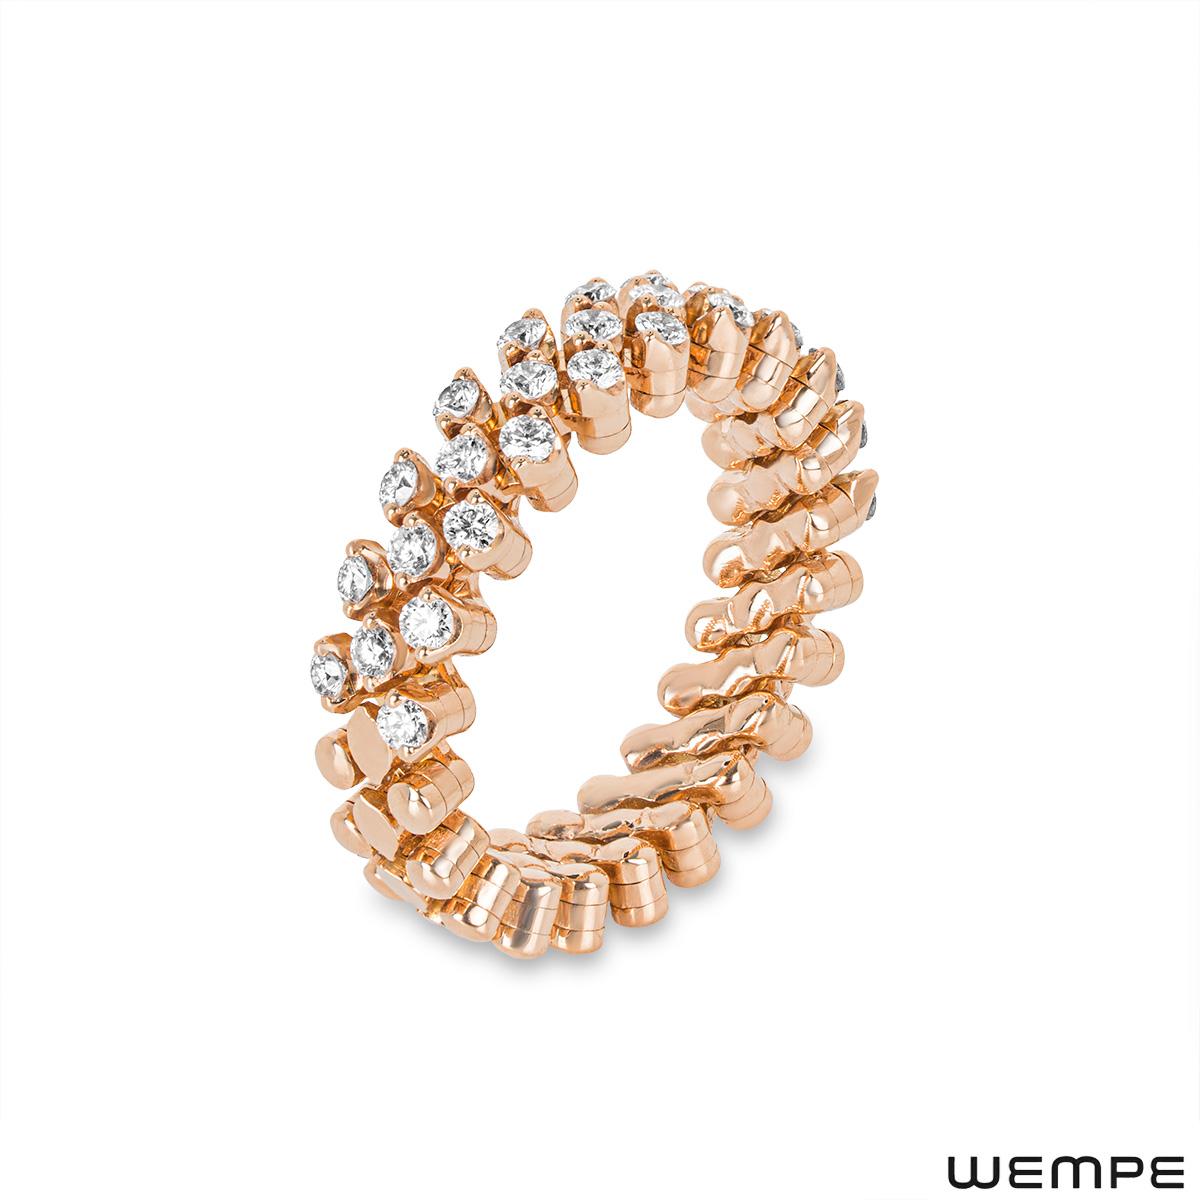 A beautiful 18k rose gold diamond half eternity ring by Wempe from the Serafino Consoli collection. The ring features three rows set to the top with 32 round brilliant cut diamonds with an approximate total weight of 0.58ct, predominately G colour